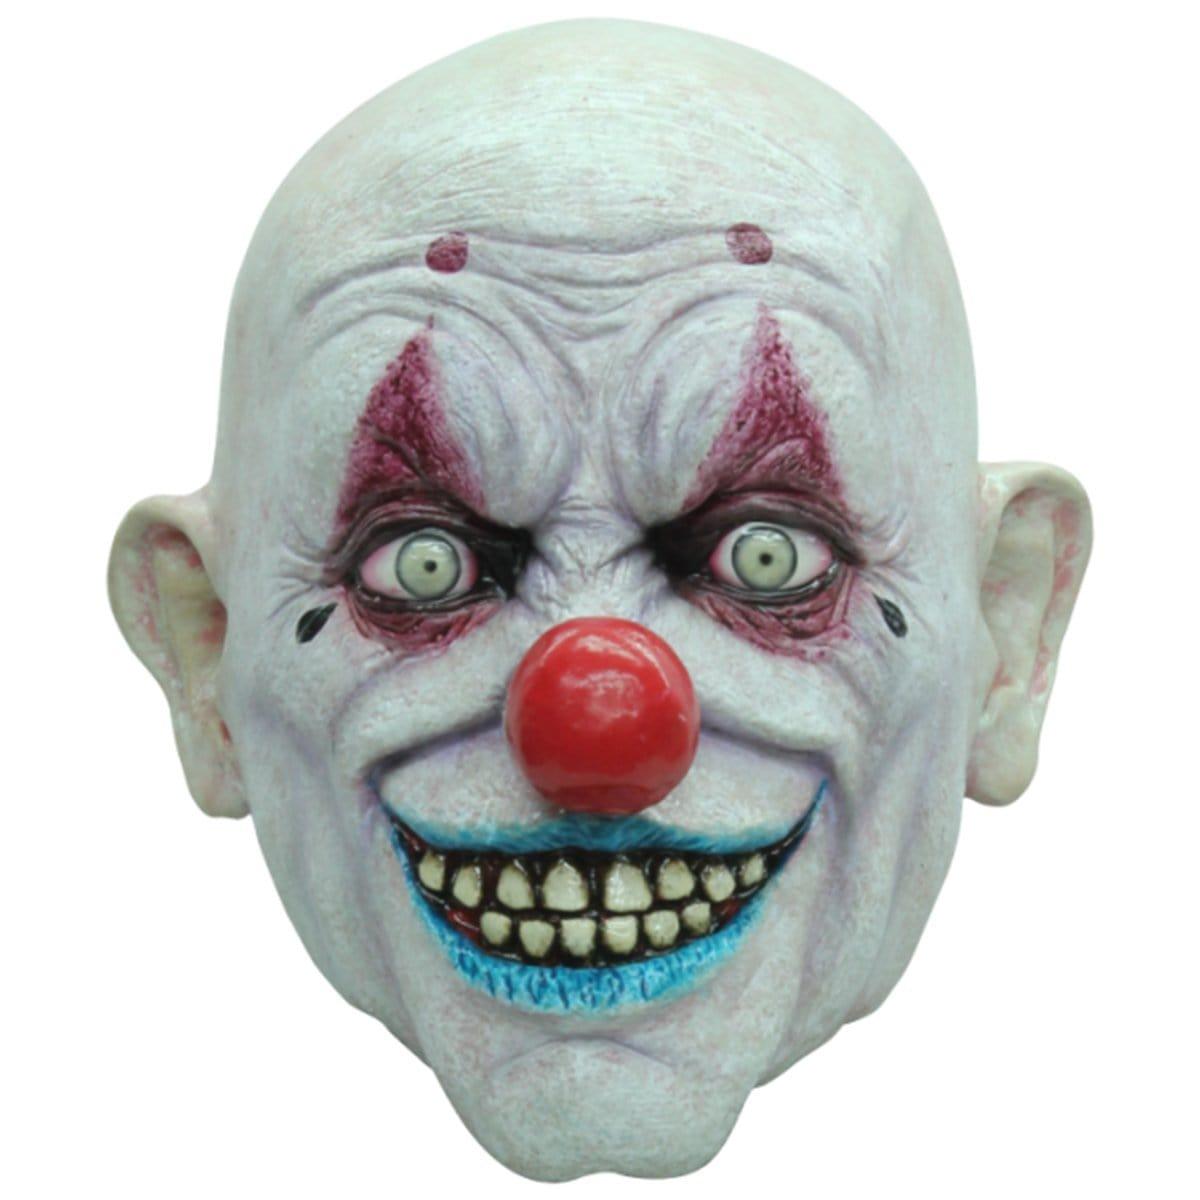 Buy Costume Accessories Crappy the clown mask sold at Party Expert